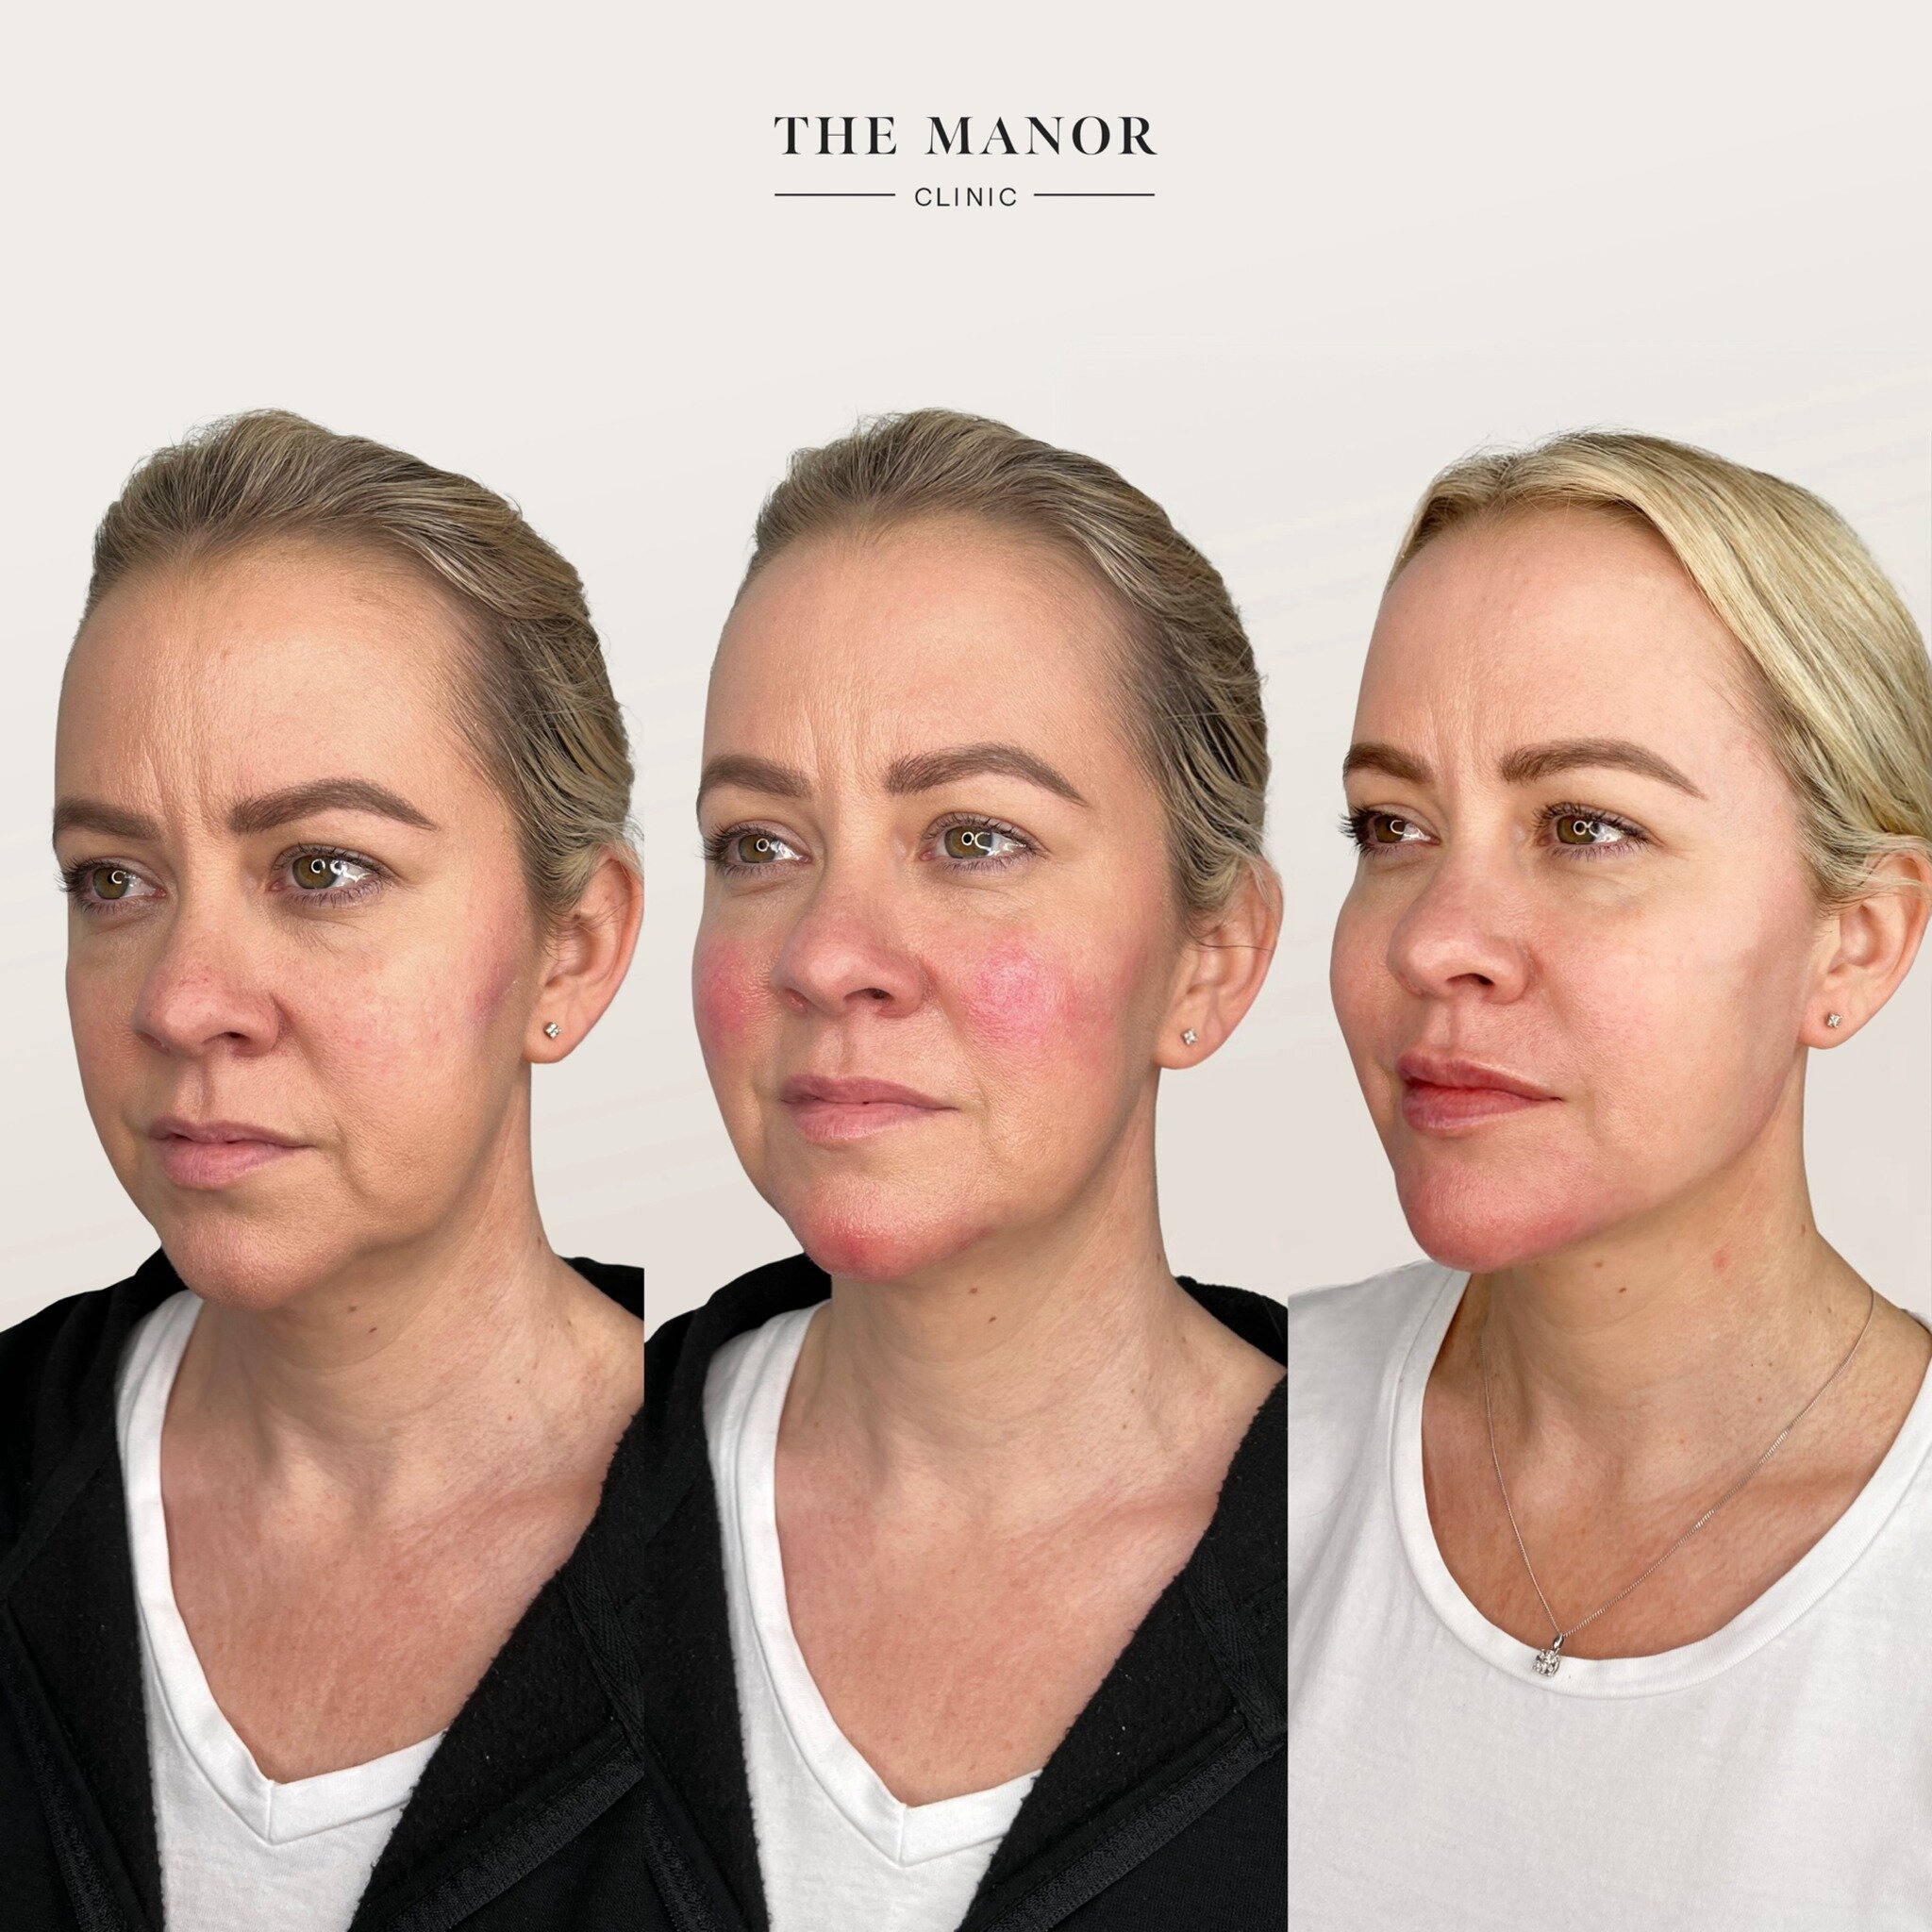 Our favourite case of the week 📆

Amelia requested a full face refresh to help her feel and look her best. The groundwork was completed in the initial sessions, followed by fine-tuning in subsequent appointments. Amelia and our team were pleasantly 